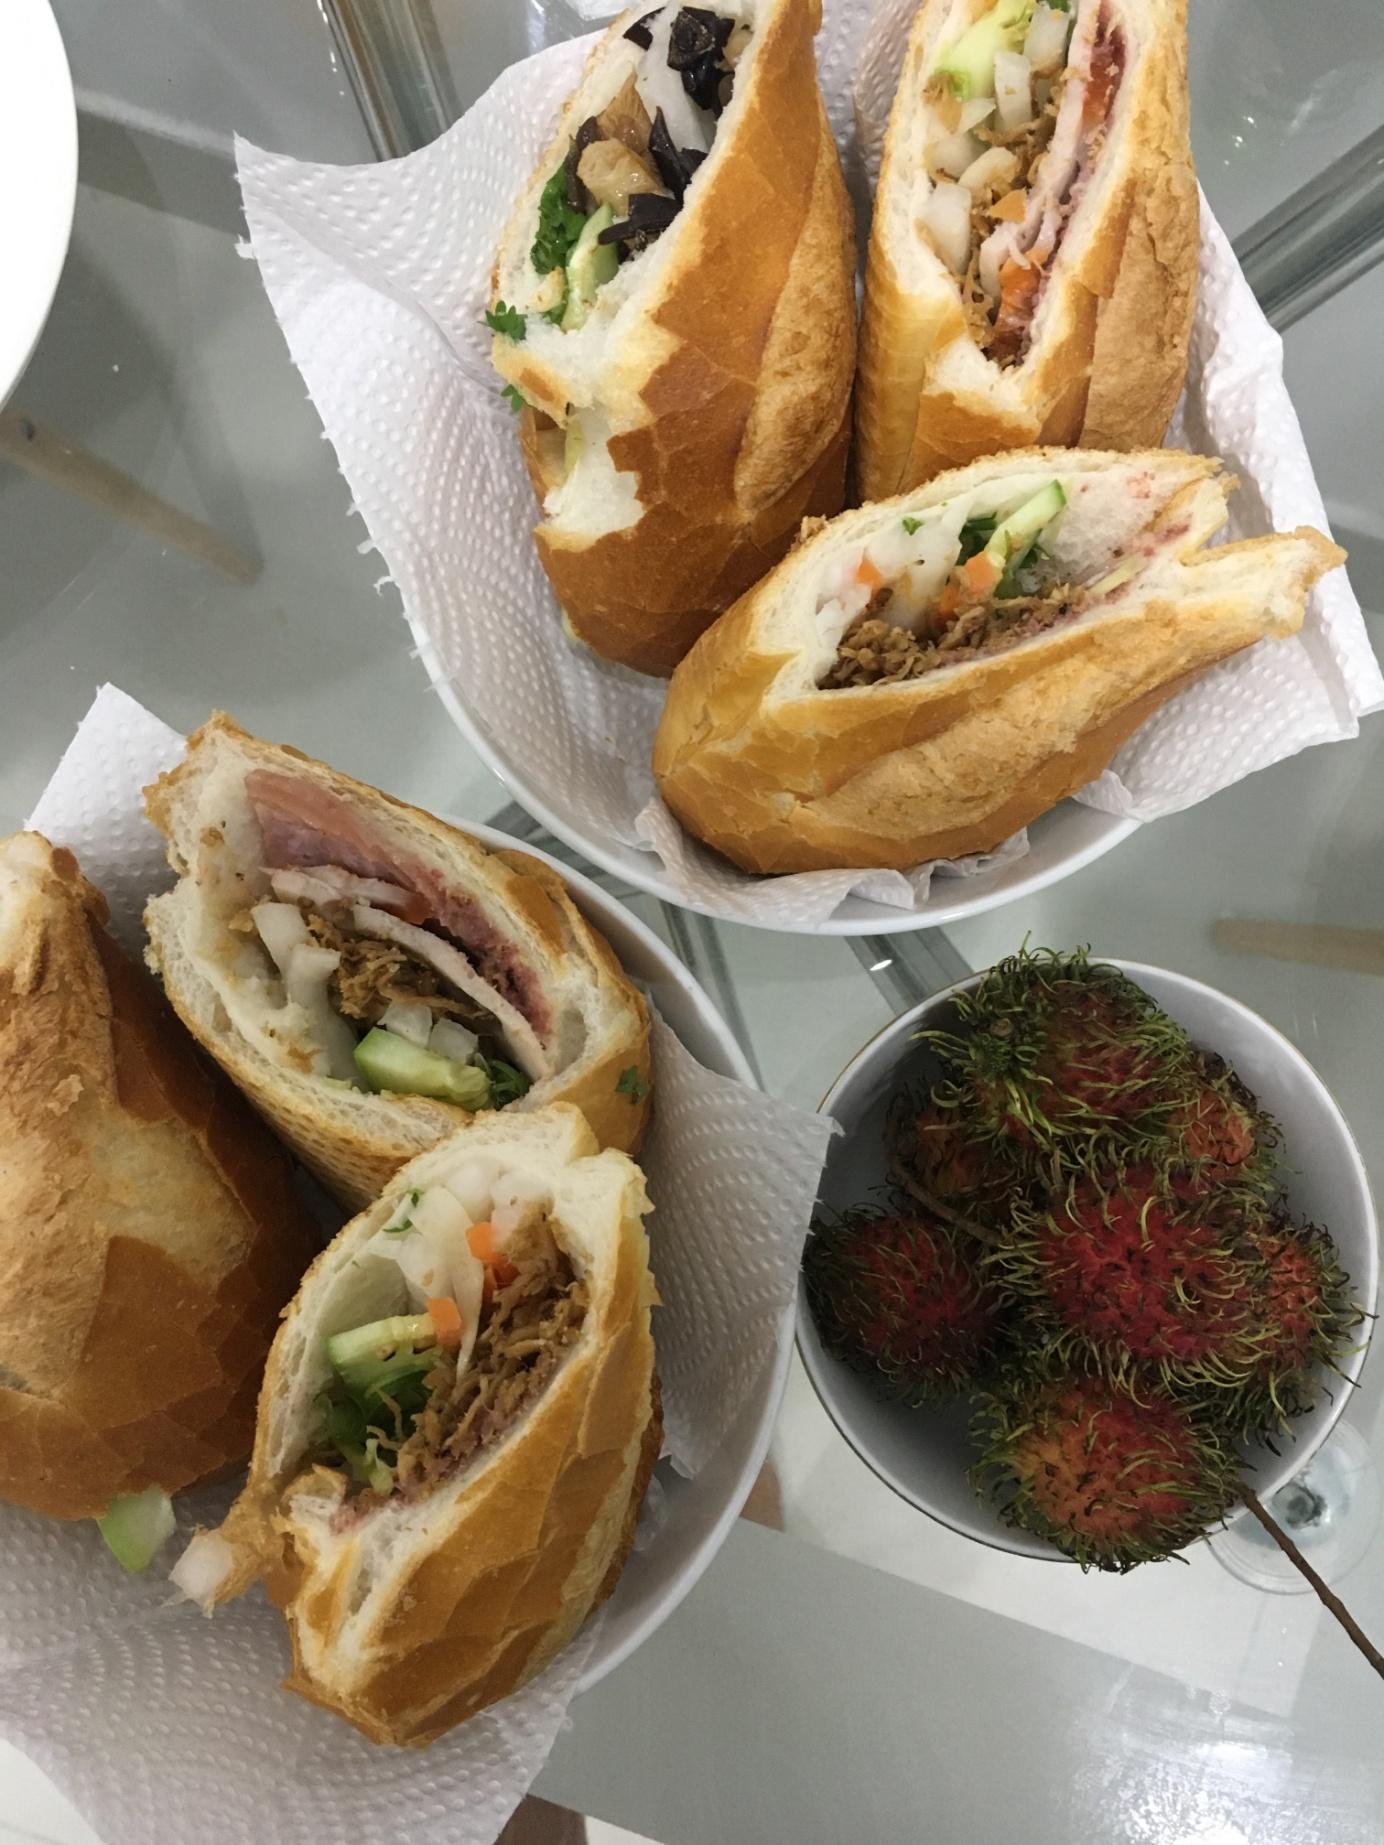 Different banh mi’s from Banh Mì Anh Phan. Photo: Johannes Christian Karl Thiele